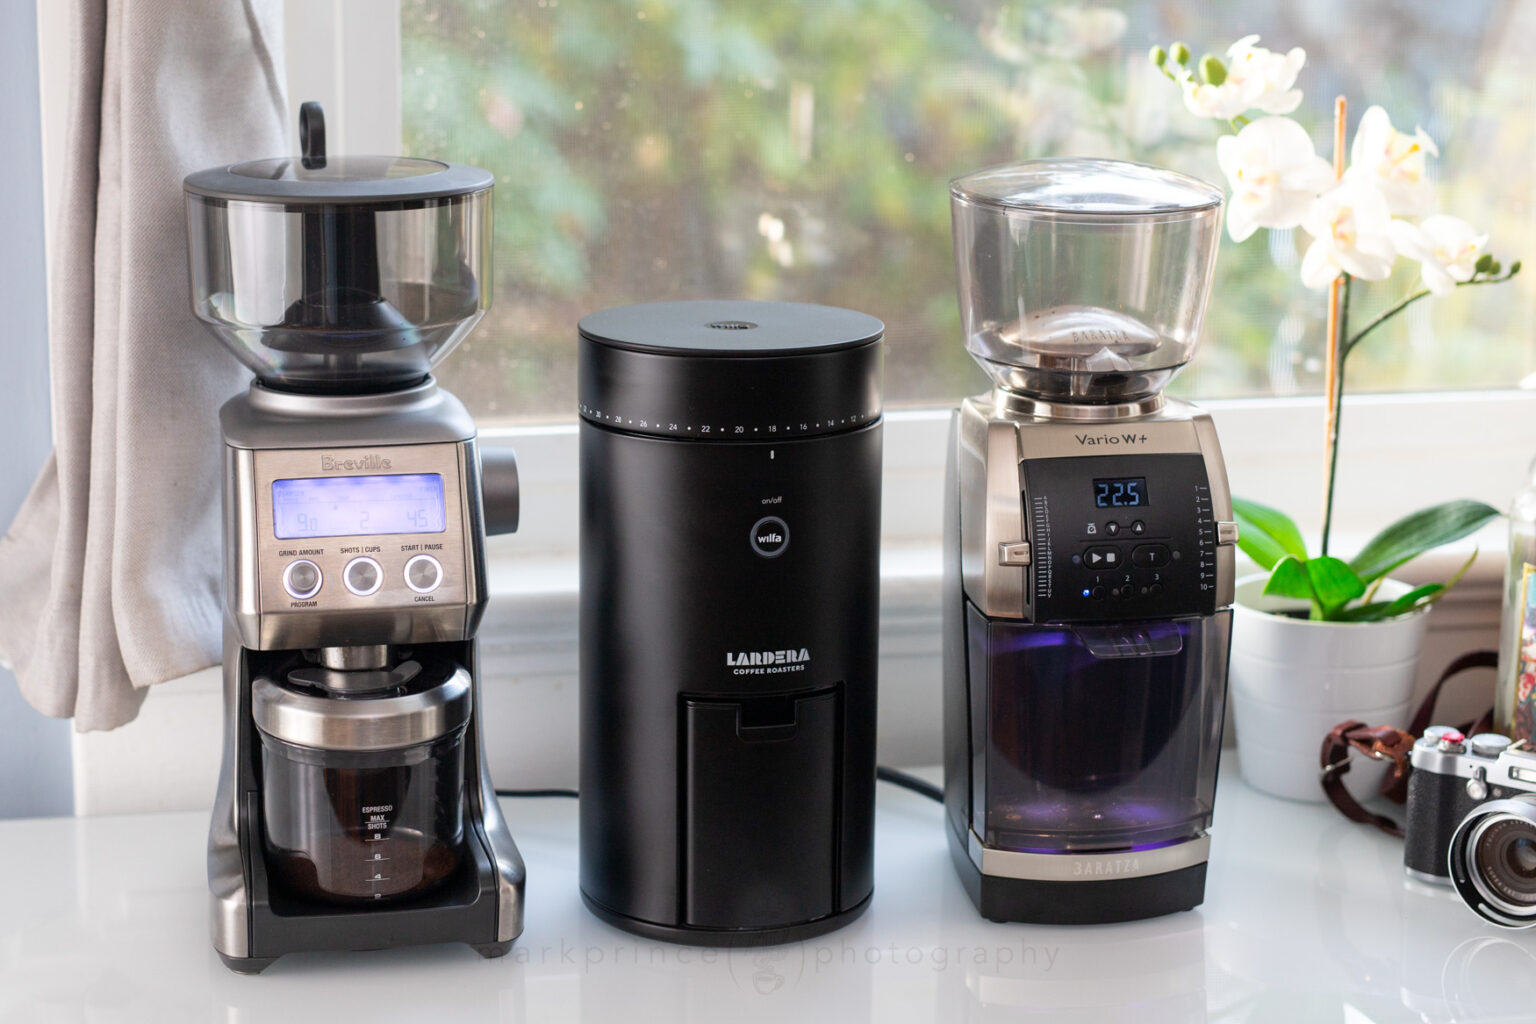 The Wilfa Uniform next to the (larger) Breville Smart Grinder Pro and Baratza Vario-W+.